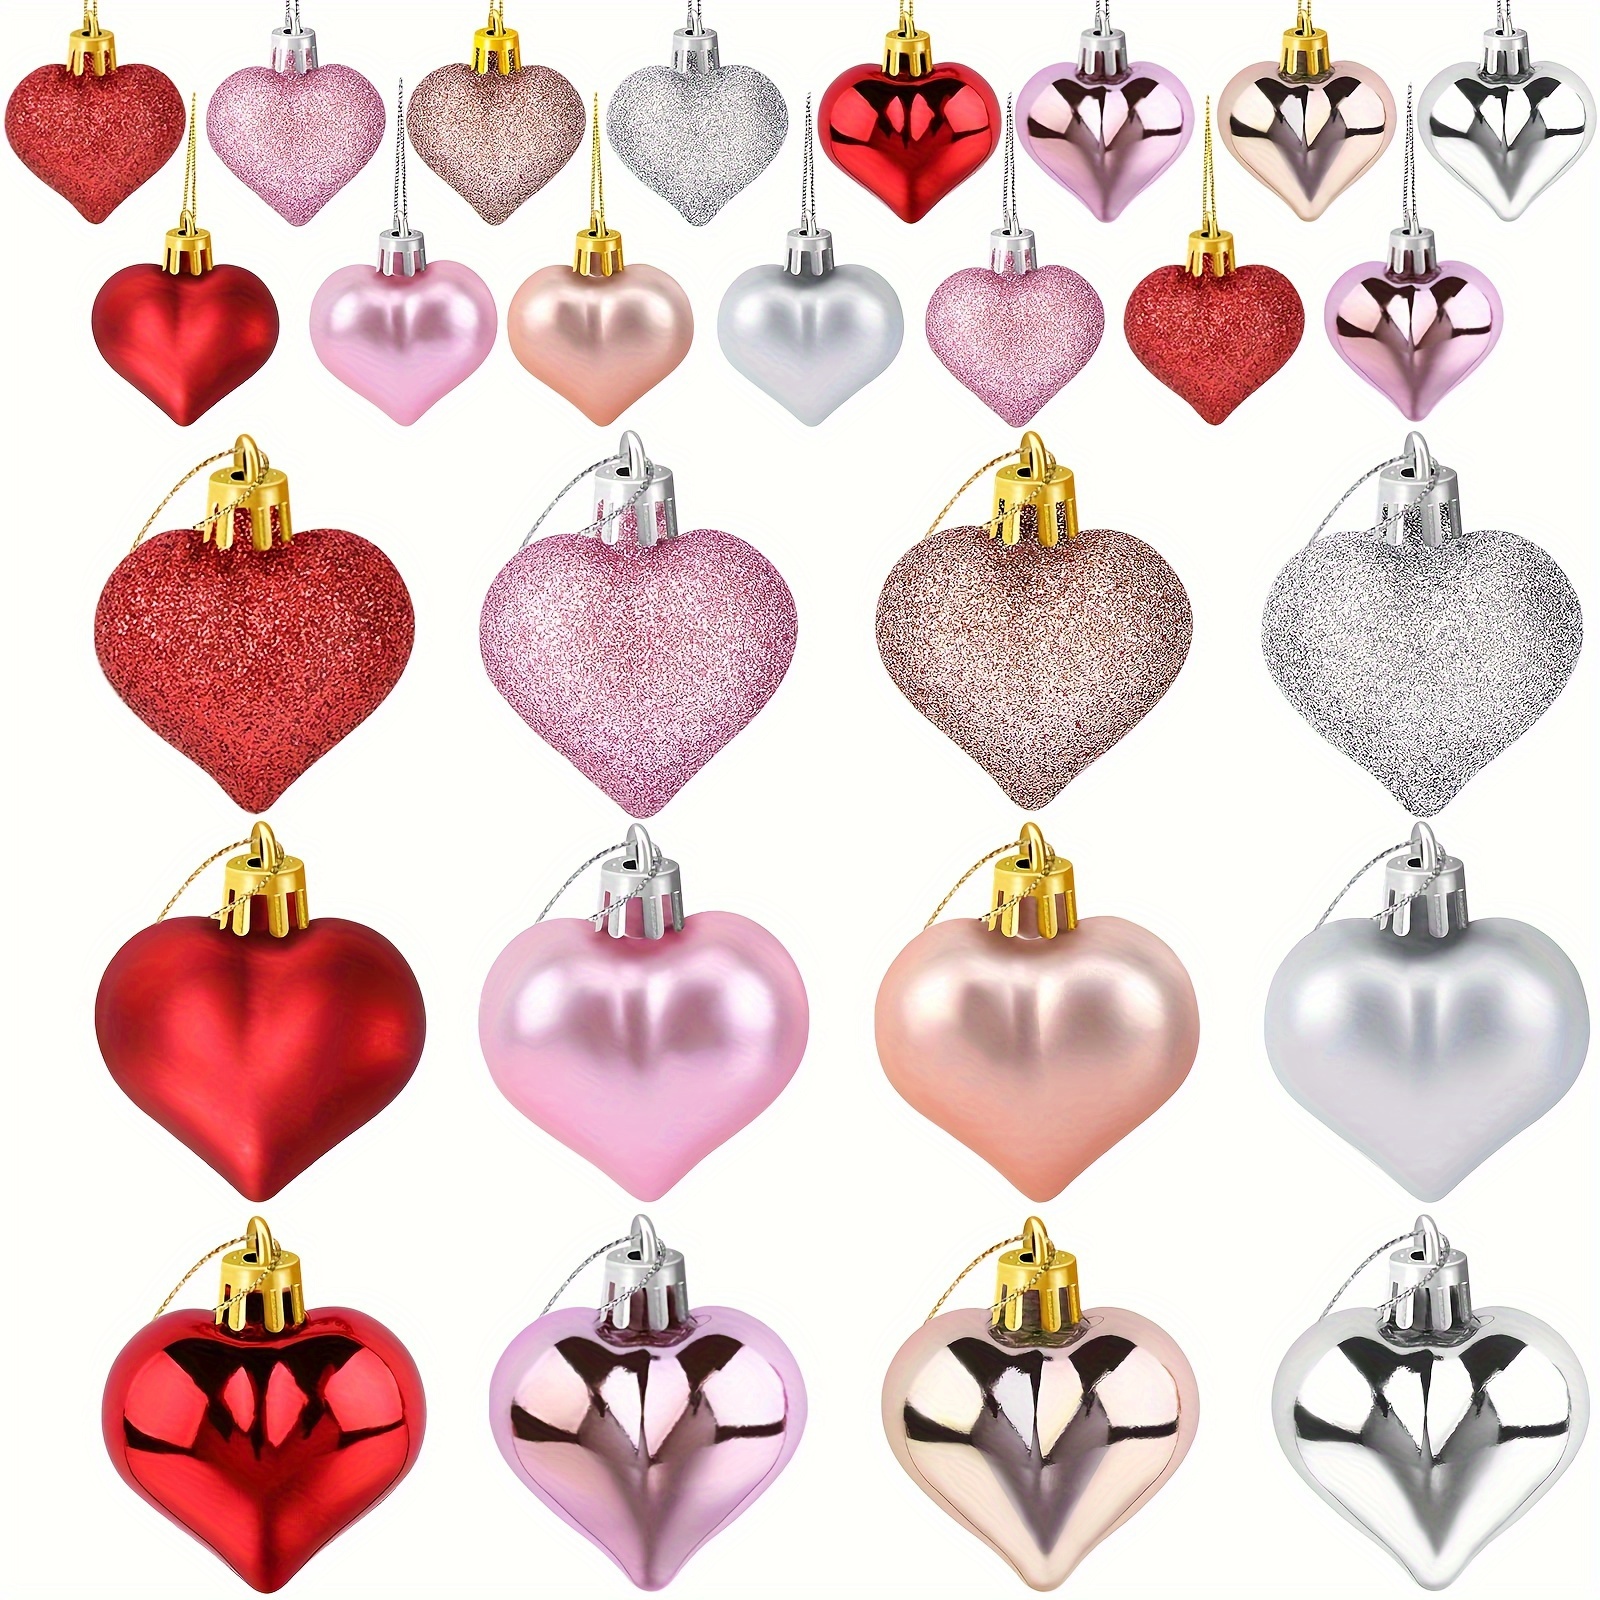  Valentines Day Decorations, Valentine's Day Heart Shaped  Ornaments, Valentines Heart Decorations, Red Pink Silver Heart Shaped  Baubles